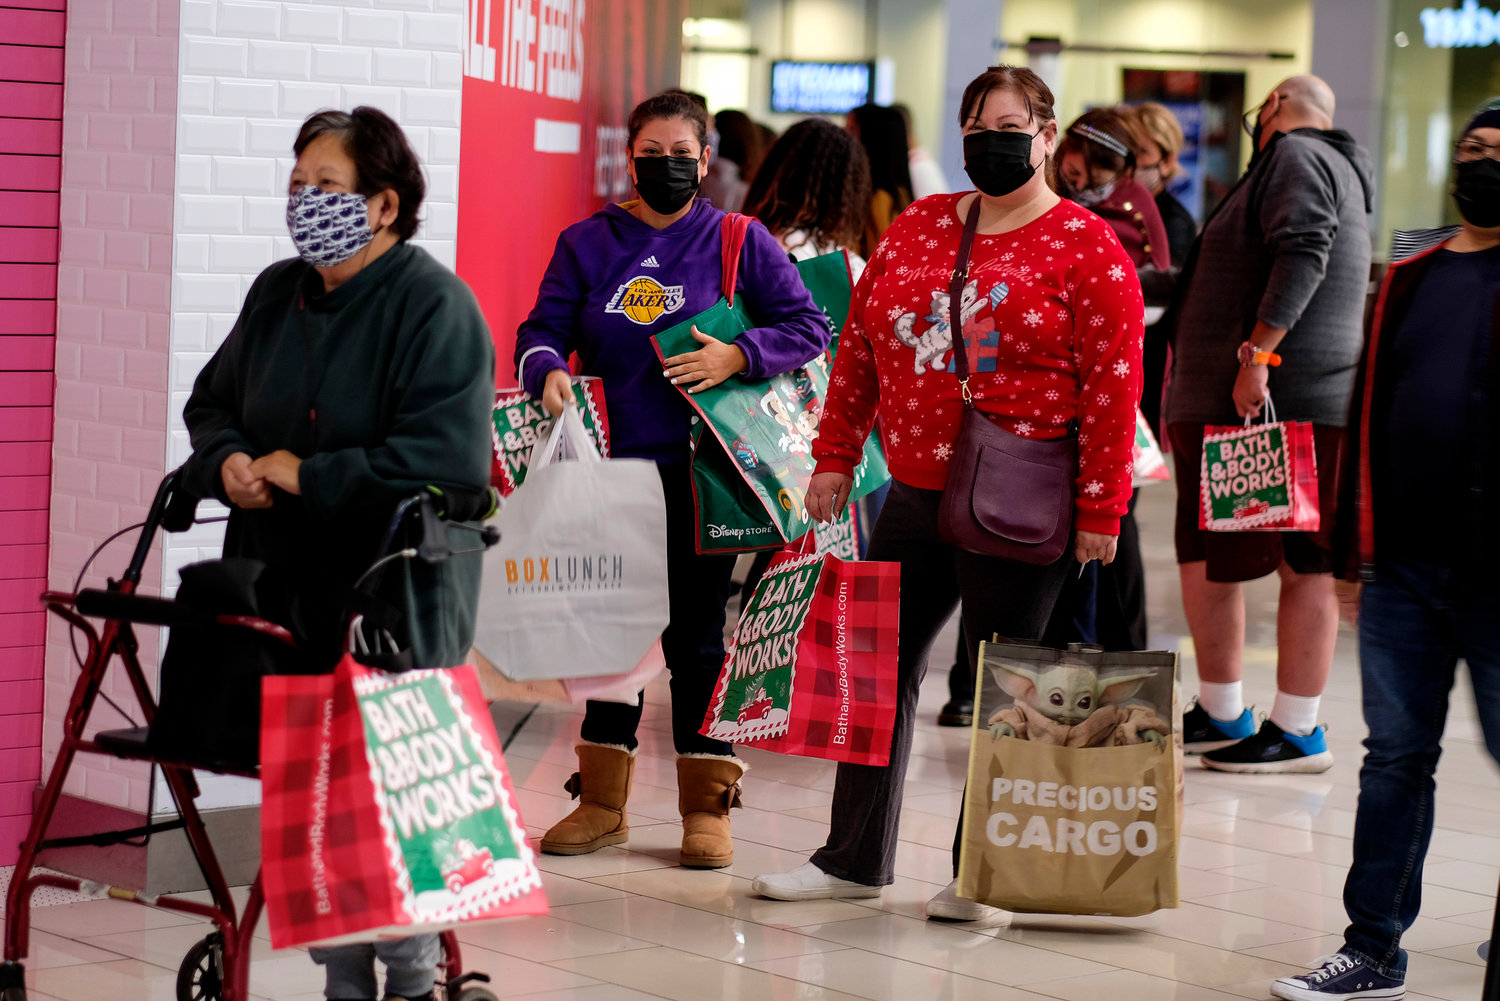 HOLIDAY SHOPPING BEGINS - Black Friday shoppers wearing face masks wait in line to enter a store at the Glendale Galleria in Glendale, Calif., Friday, Nov. 27, 2020. With online shopping continually on the rise, retailers and shippers are reminding shoppers of common scams to watch out for this year when placing orders.